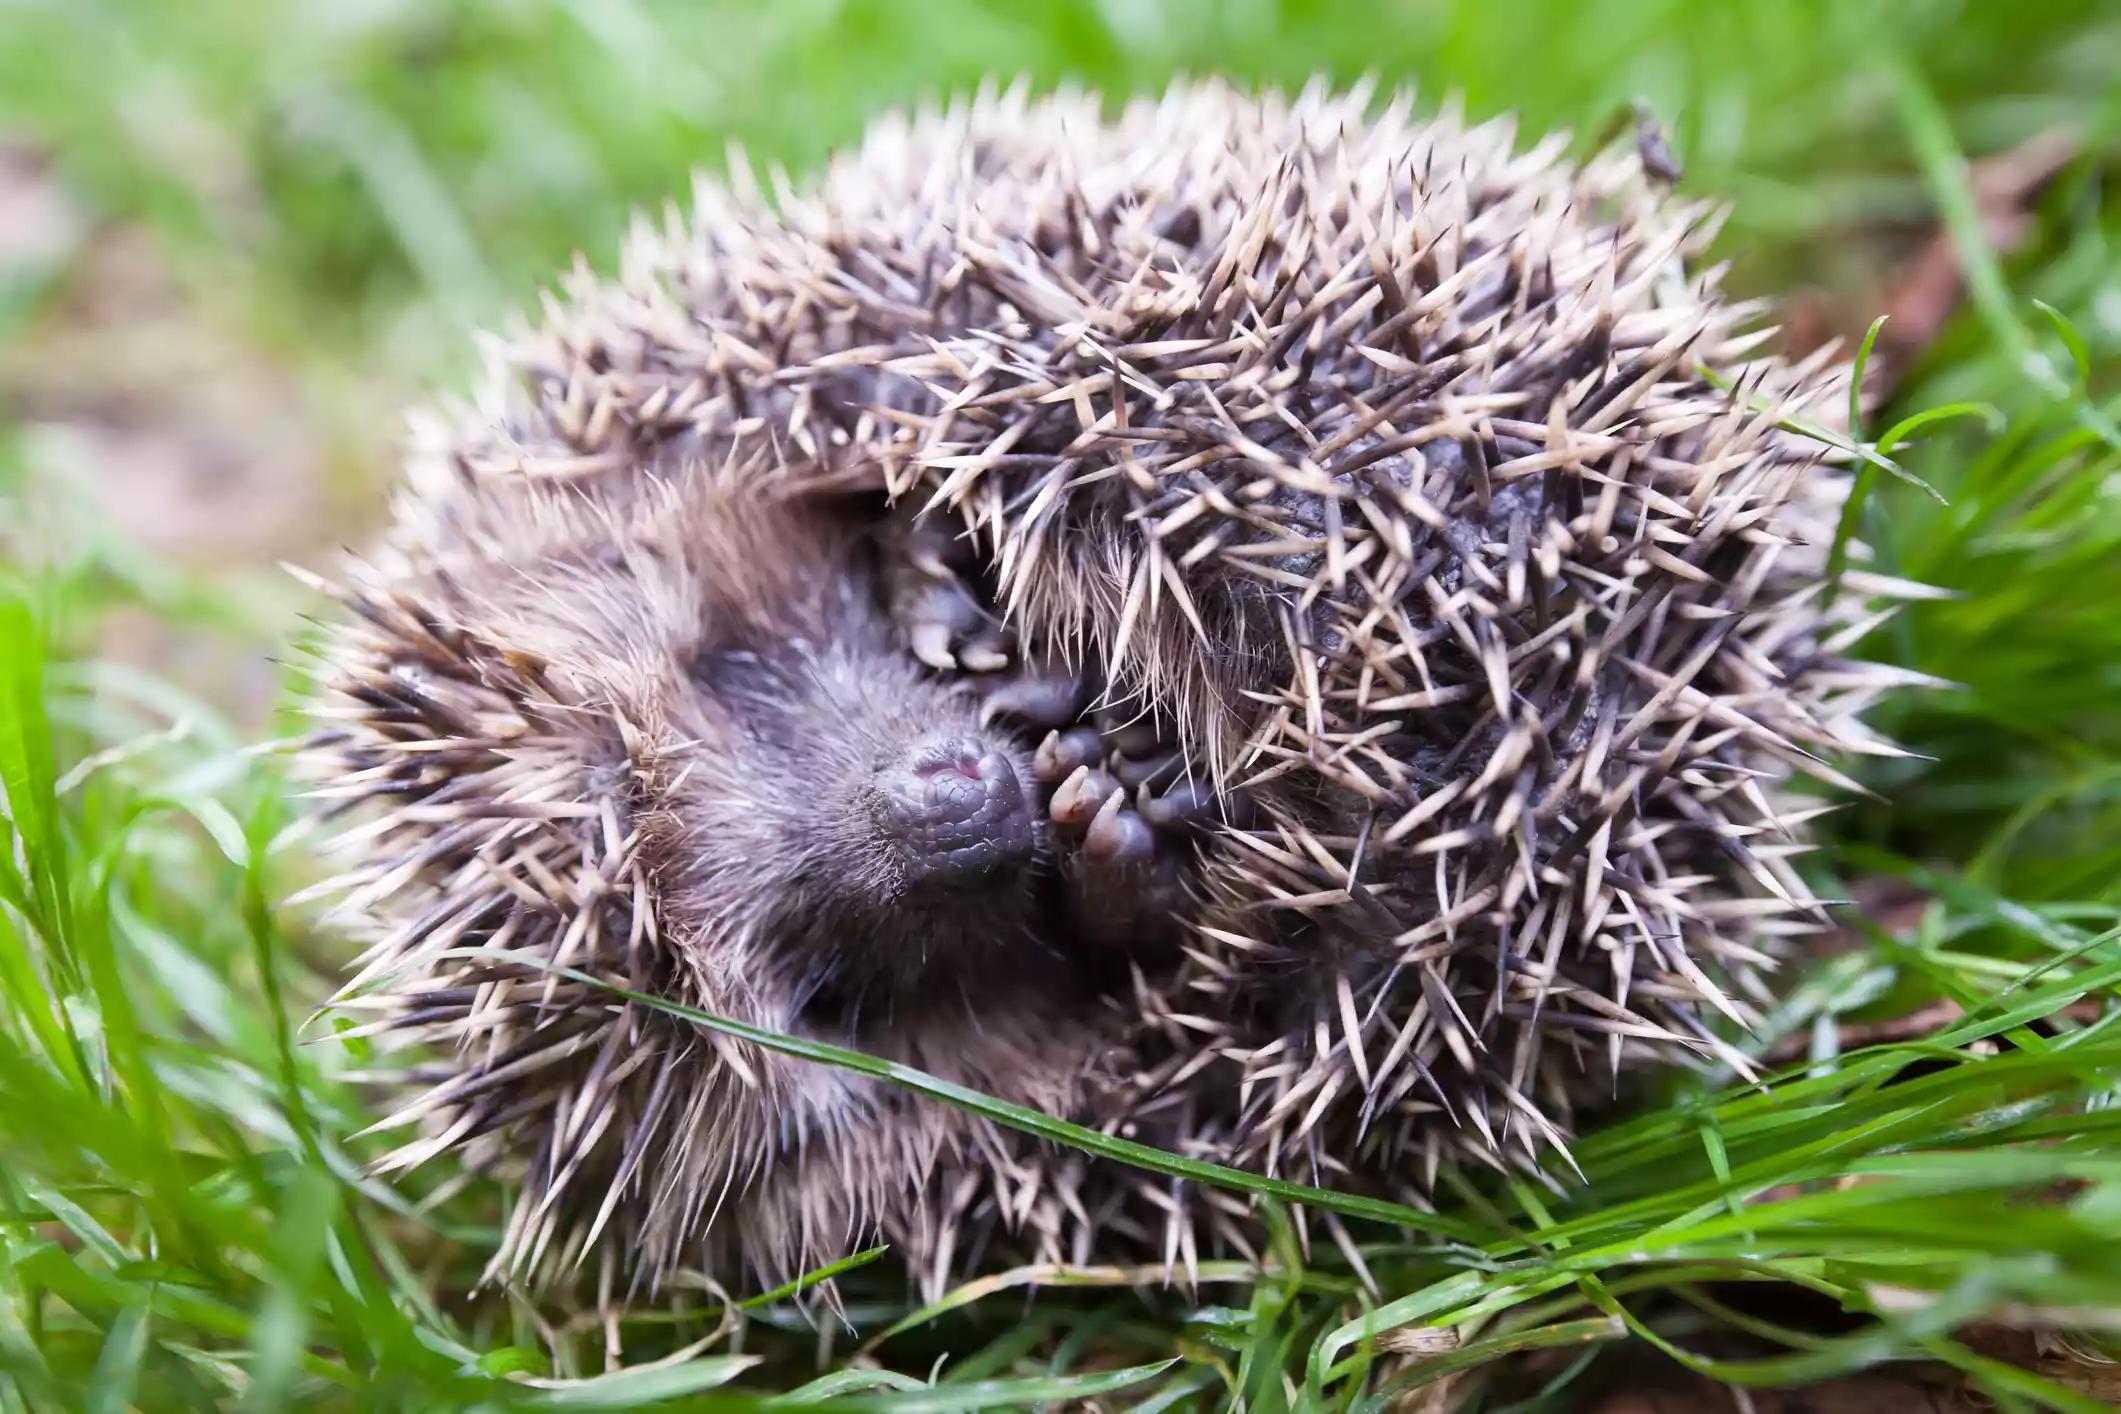 A frightened hedgehog rolled into a ball